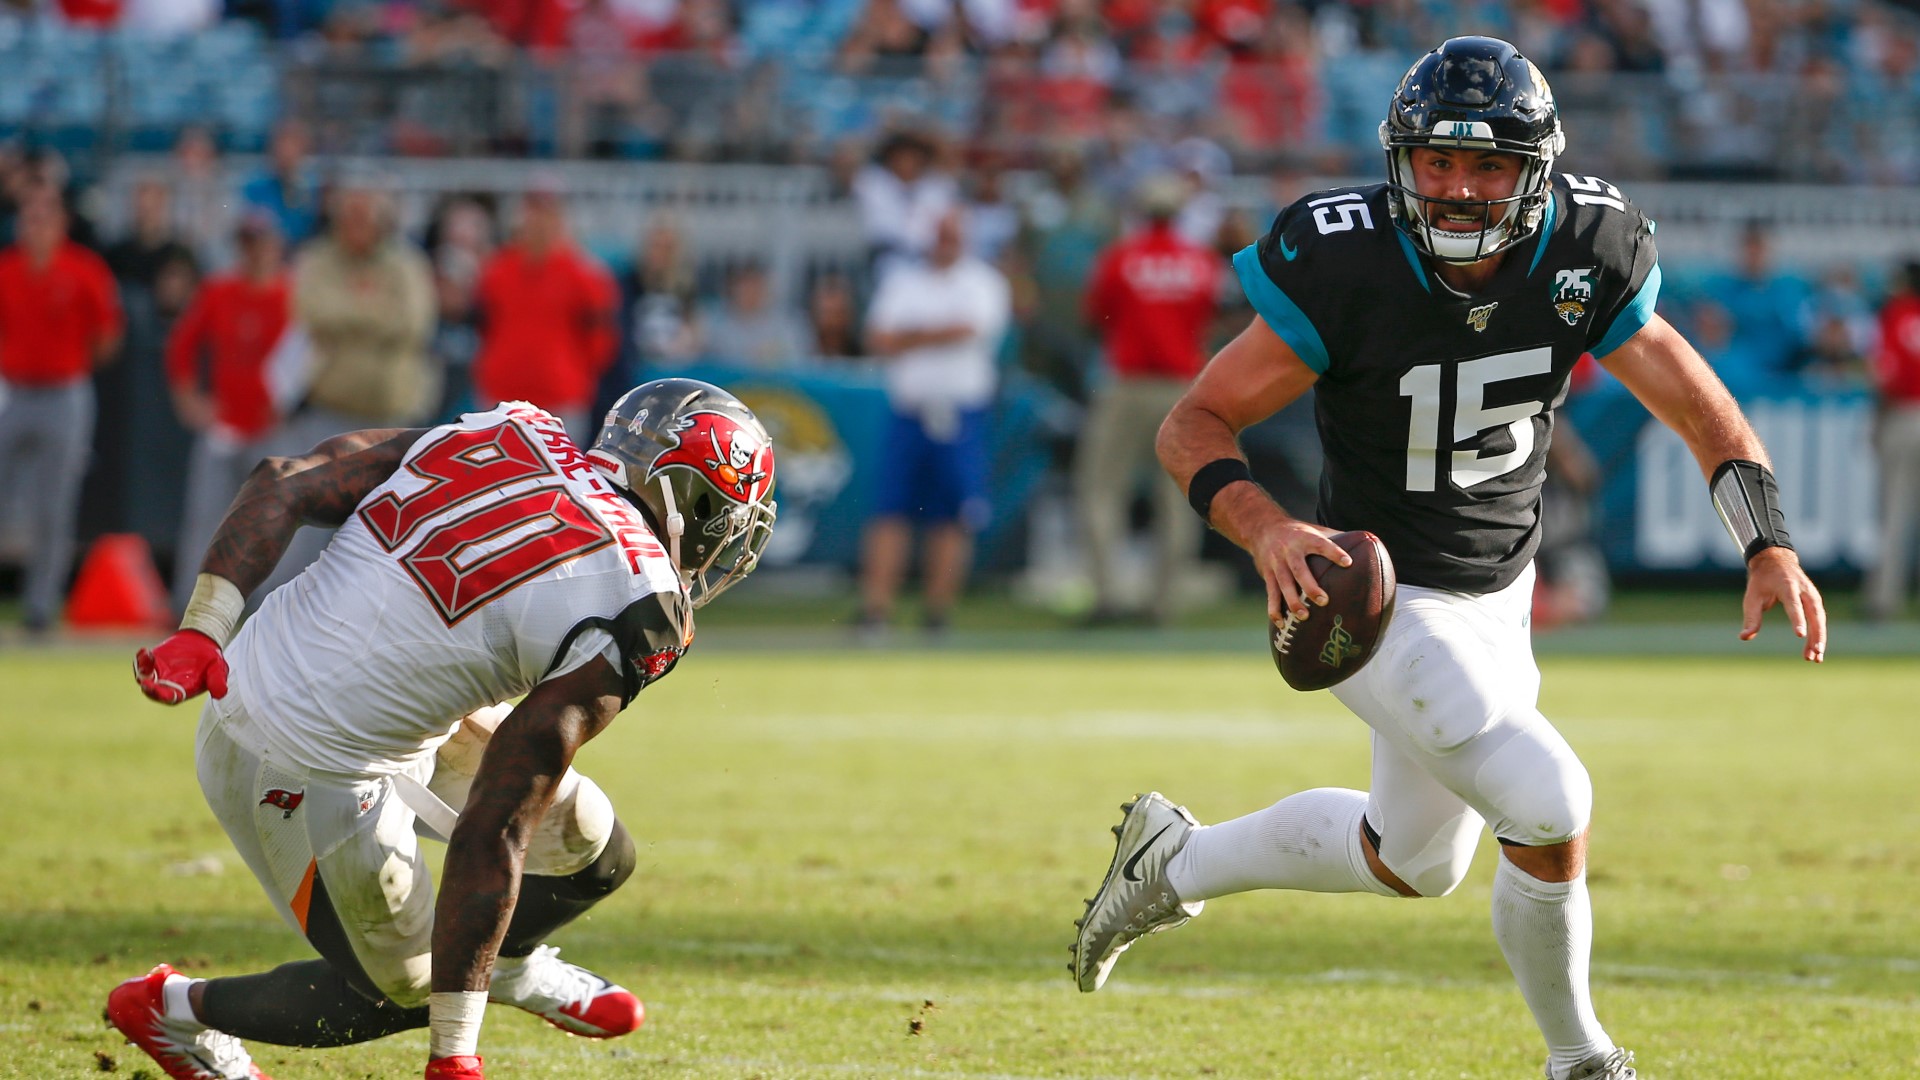 The quarterback will start the remainder of Jacksonville's game this season